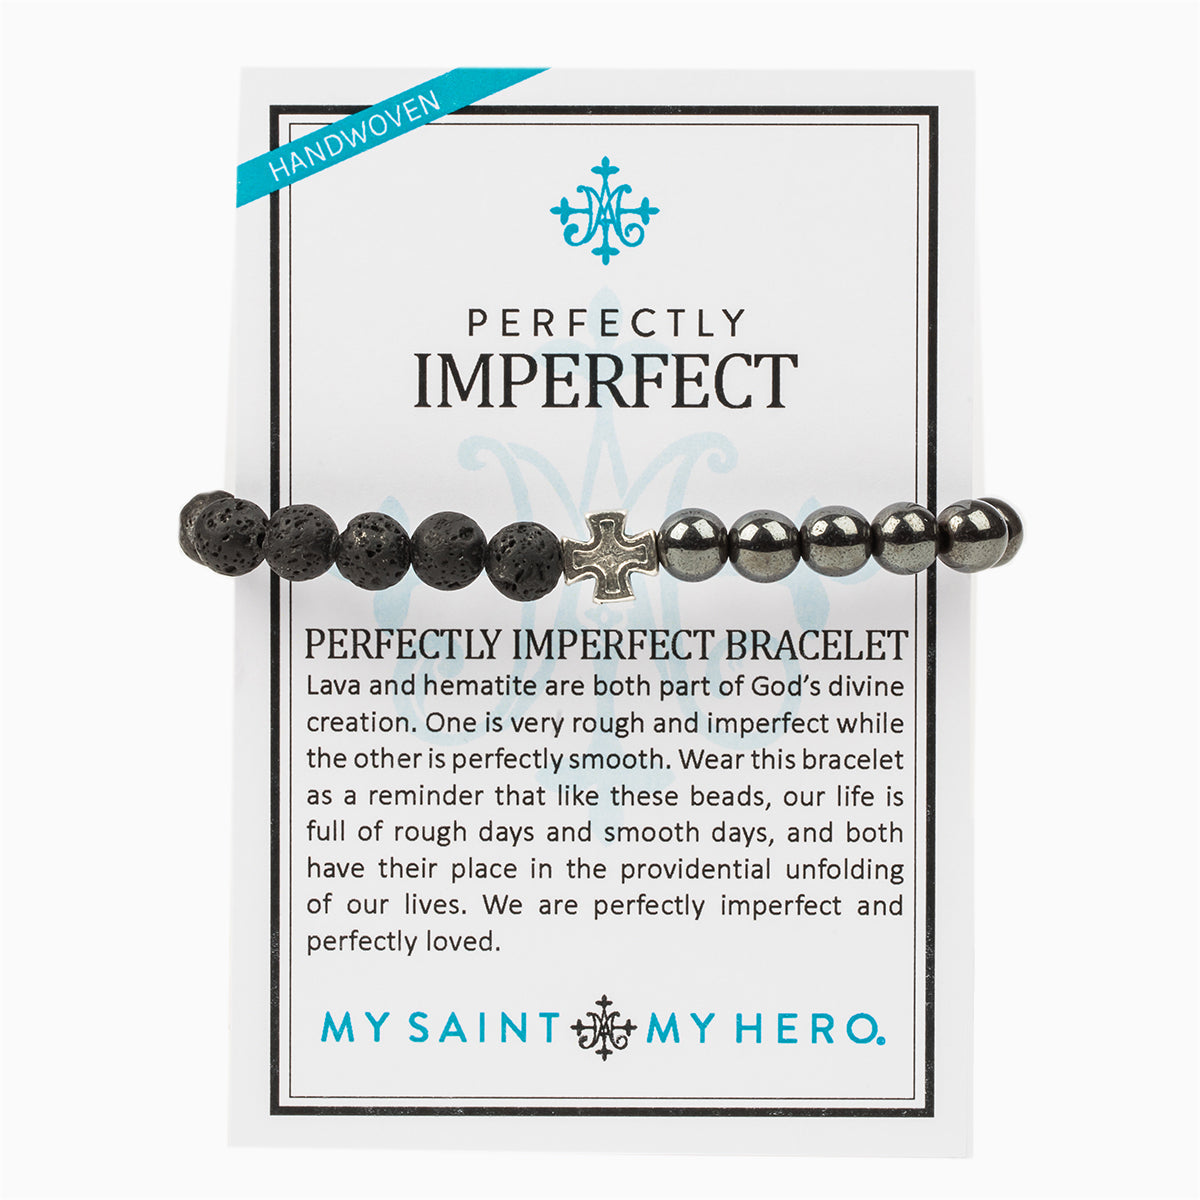 Perfectly Imperfect Bracelet by My Saint My Hero